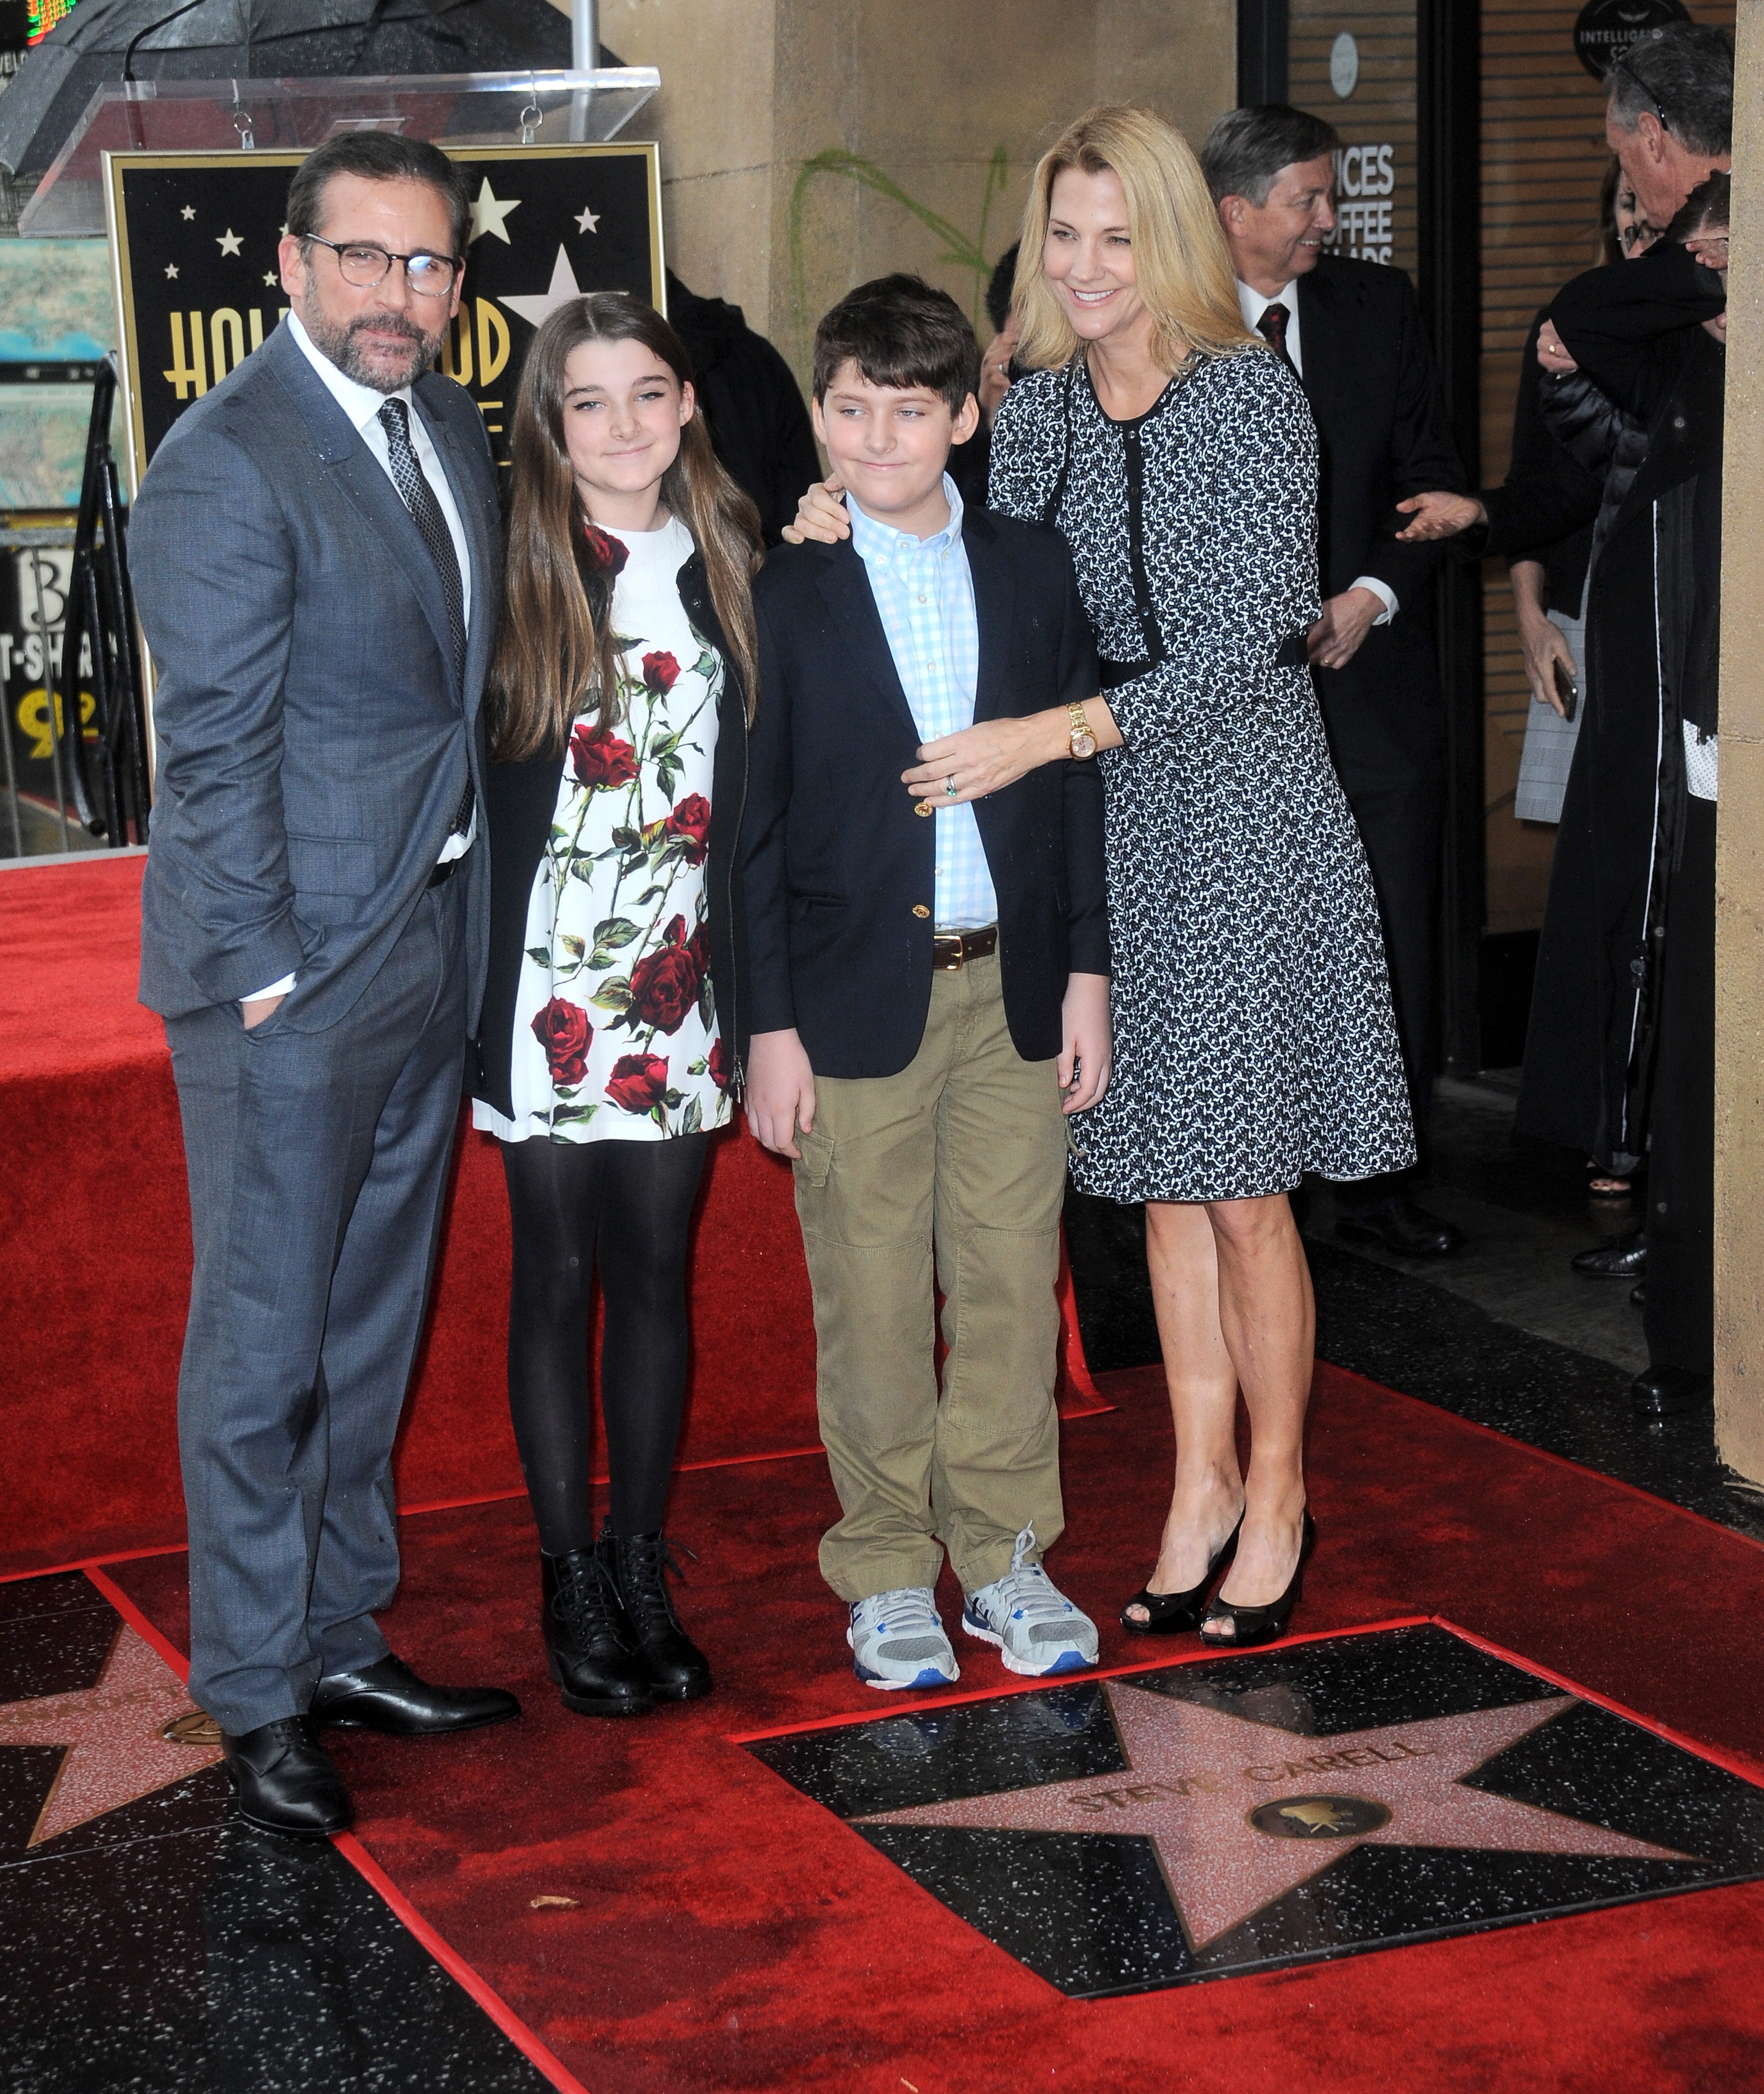 Actor Steve Carell, daughter Elisabeth Carell, son John Carell and wife Nancy Carell at Steve Carell's Star Ceremony held on the Hollywood Walk of Fame on January 6, 2016 in Hollywood, California. | Source: Getty Images